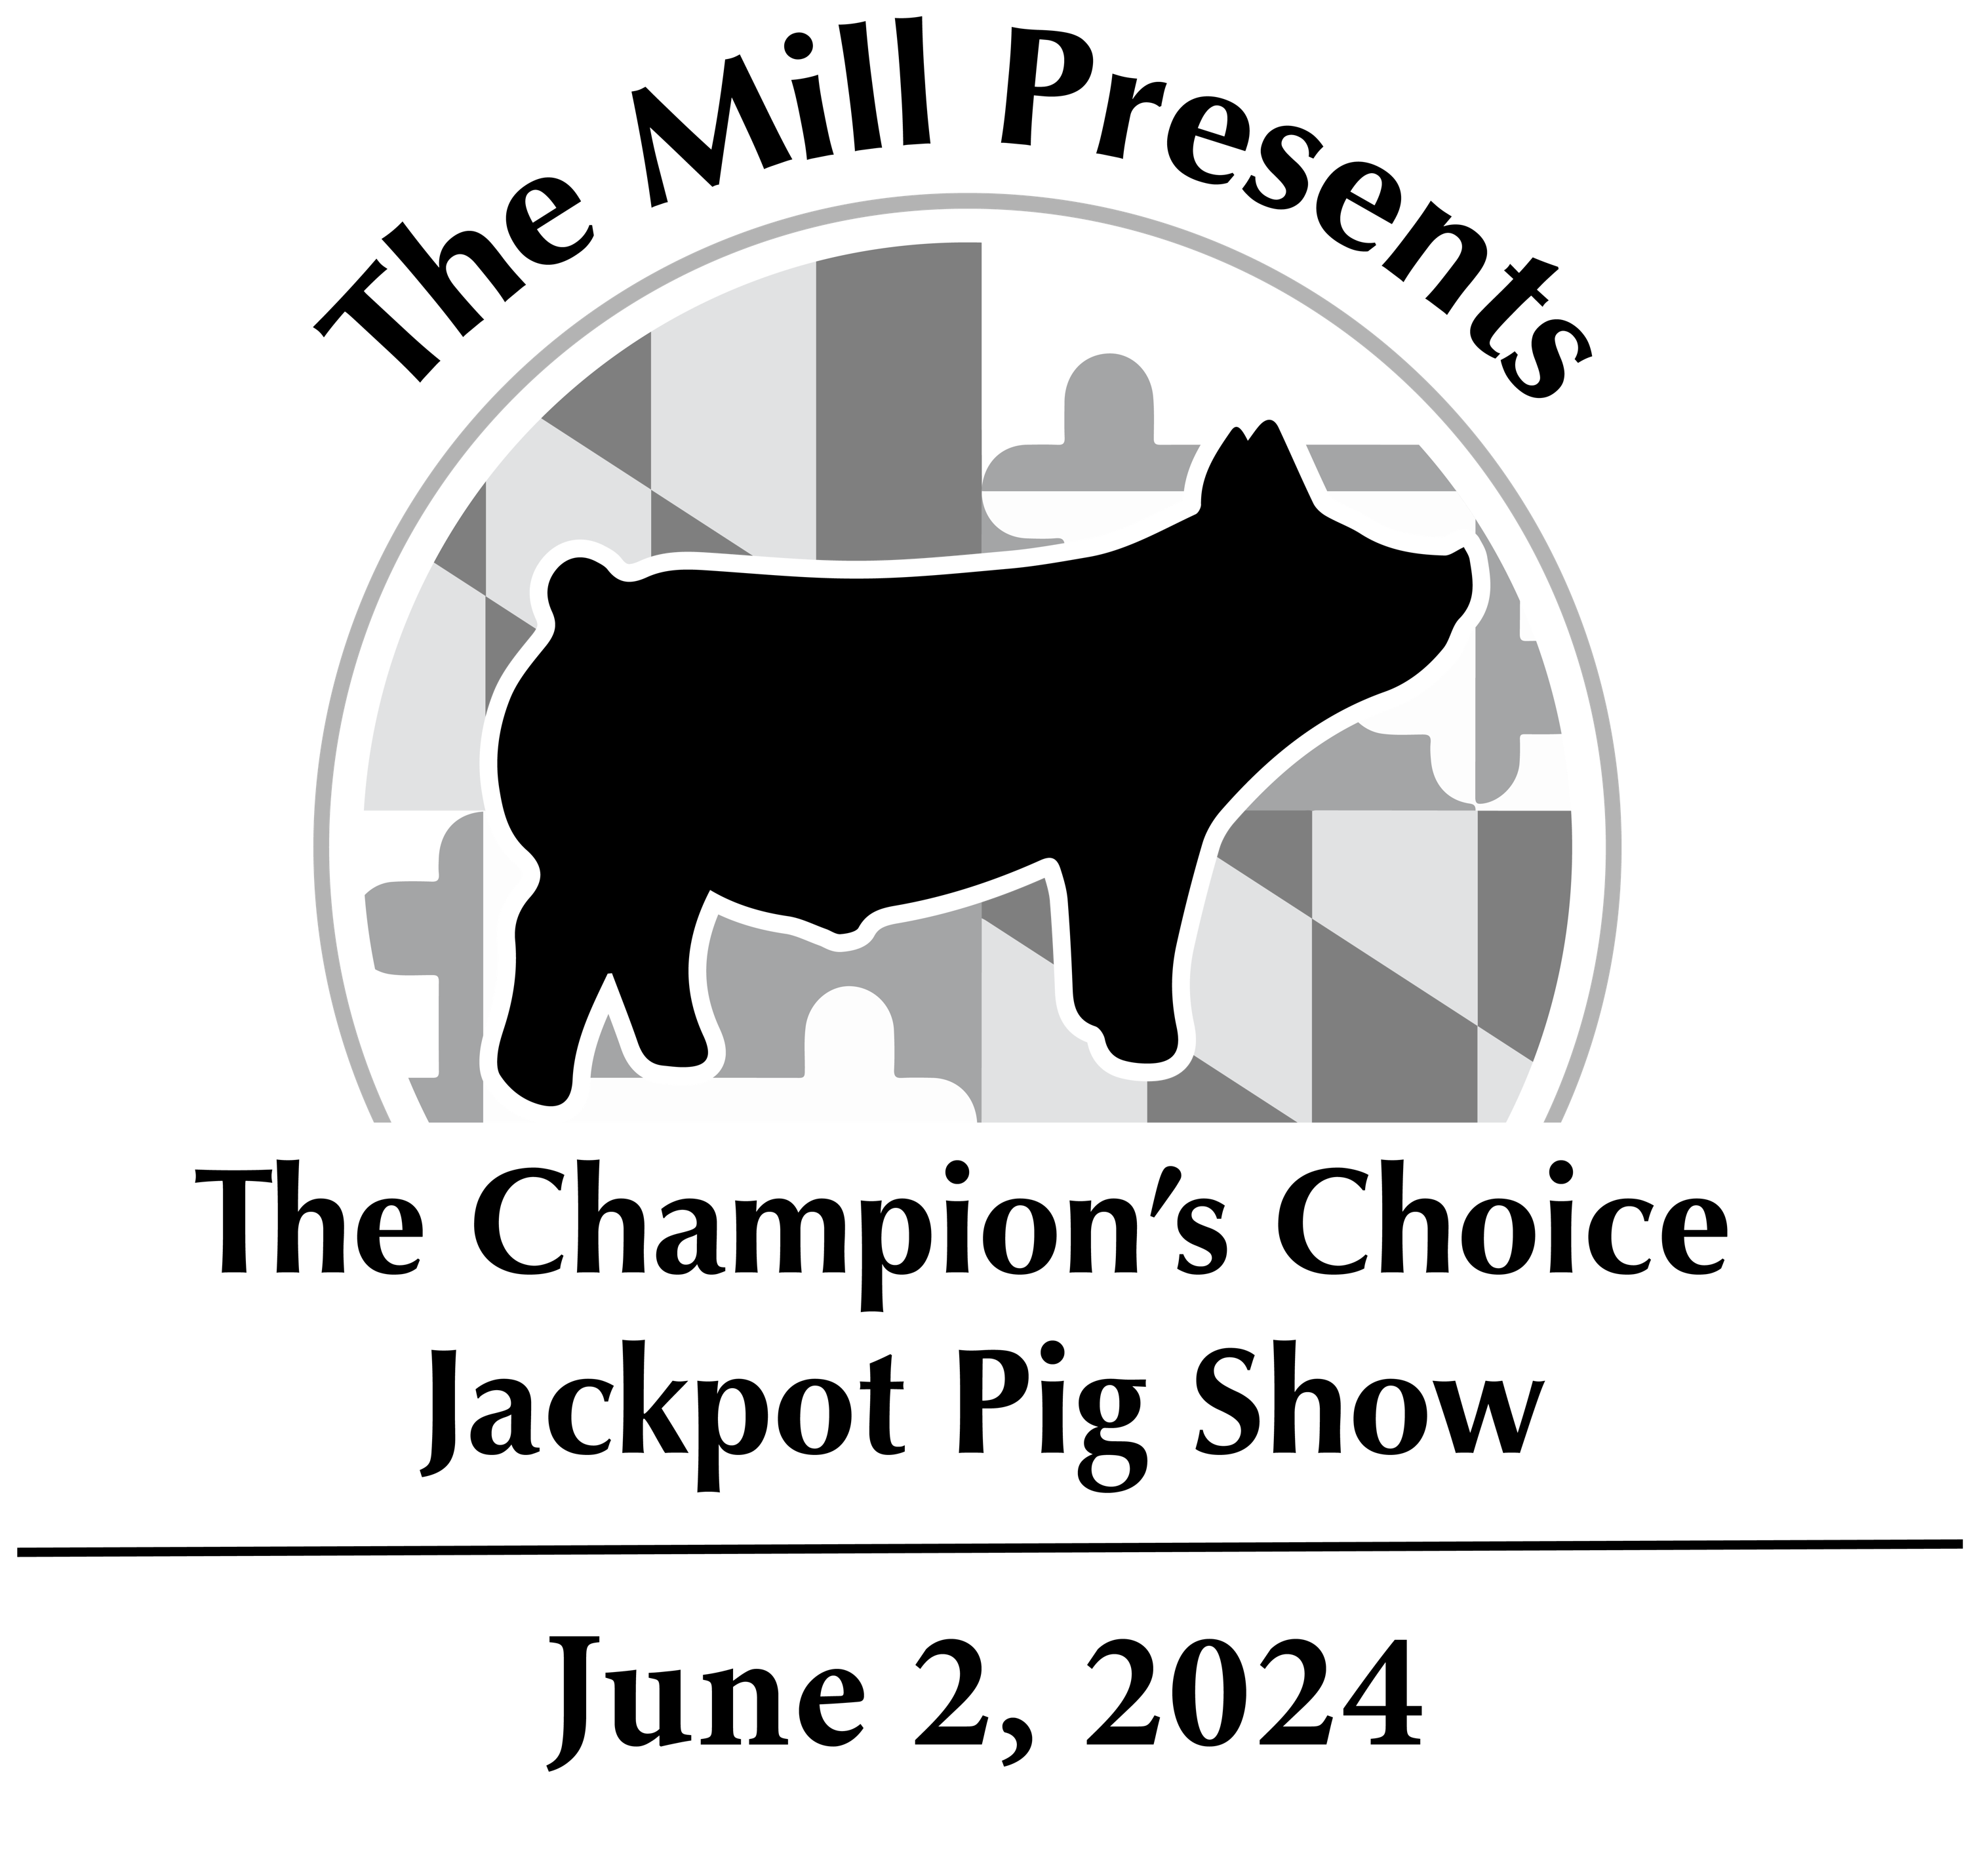 The Mill's Jackpot Pig Show